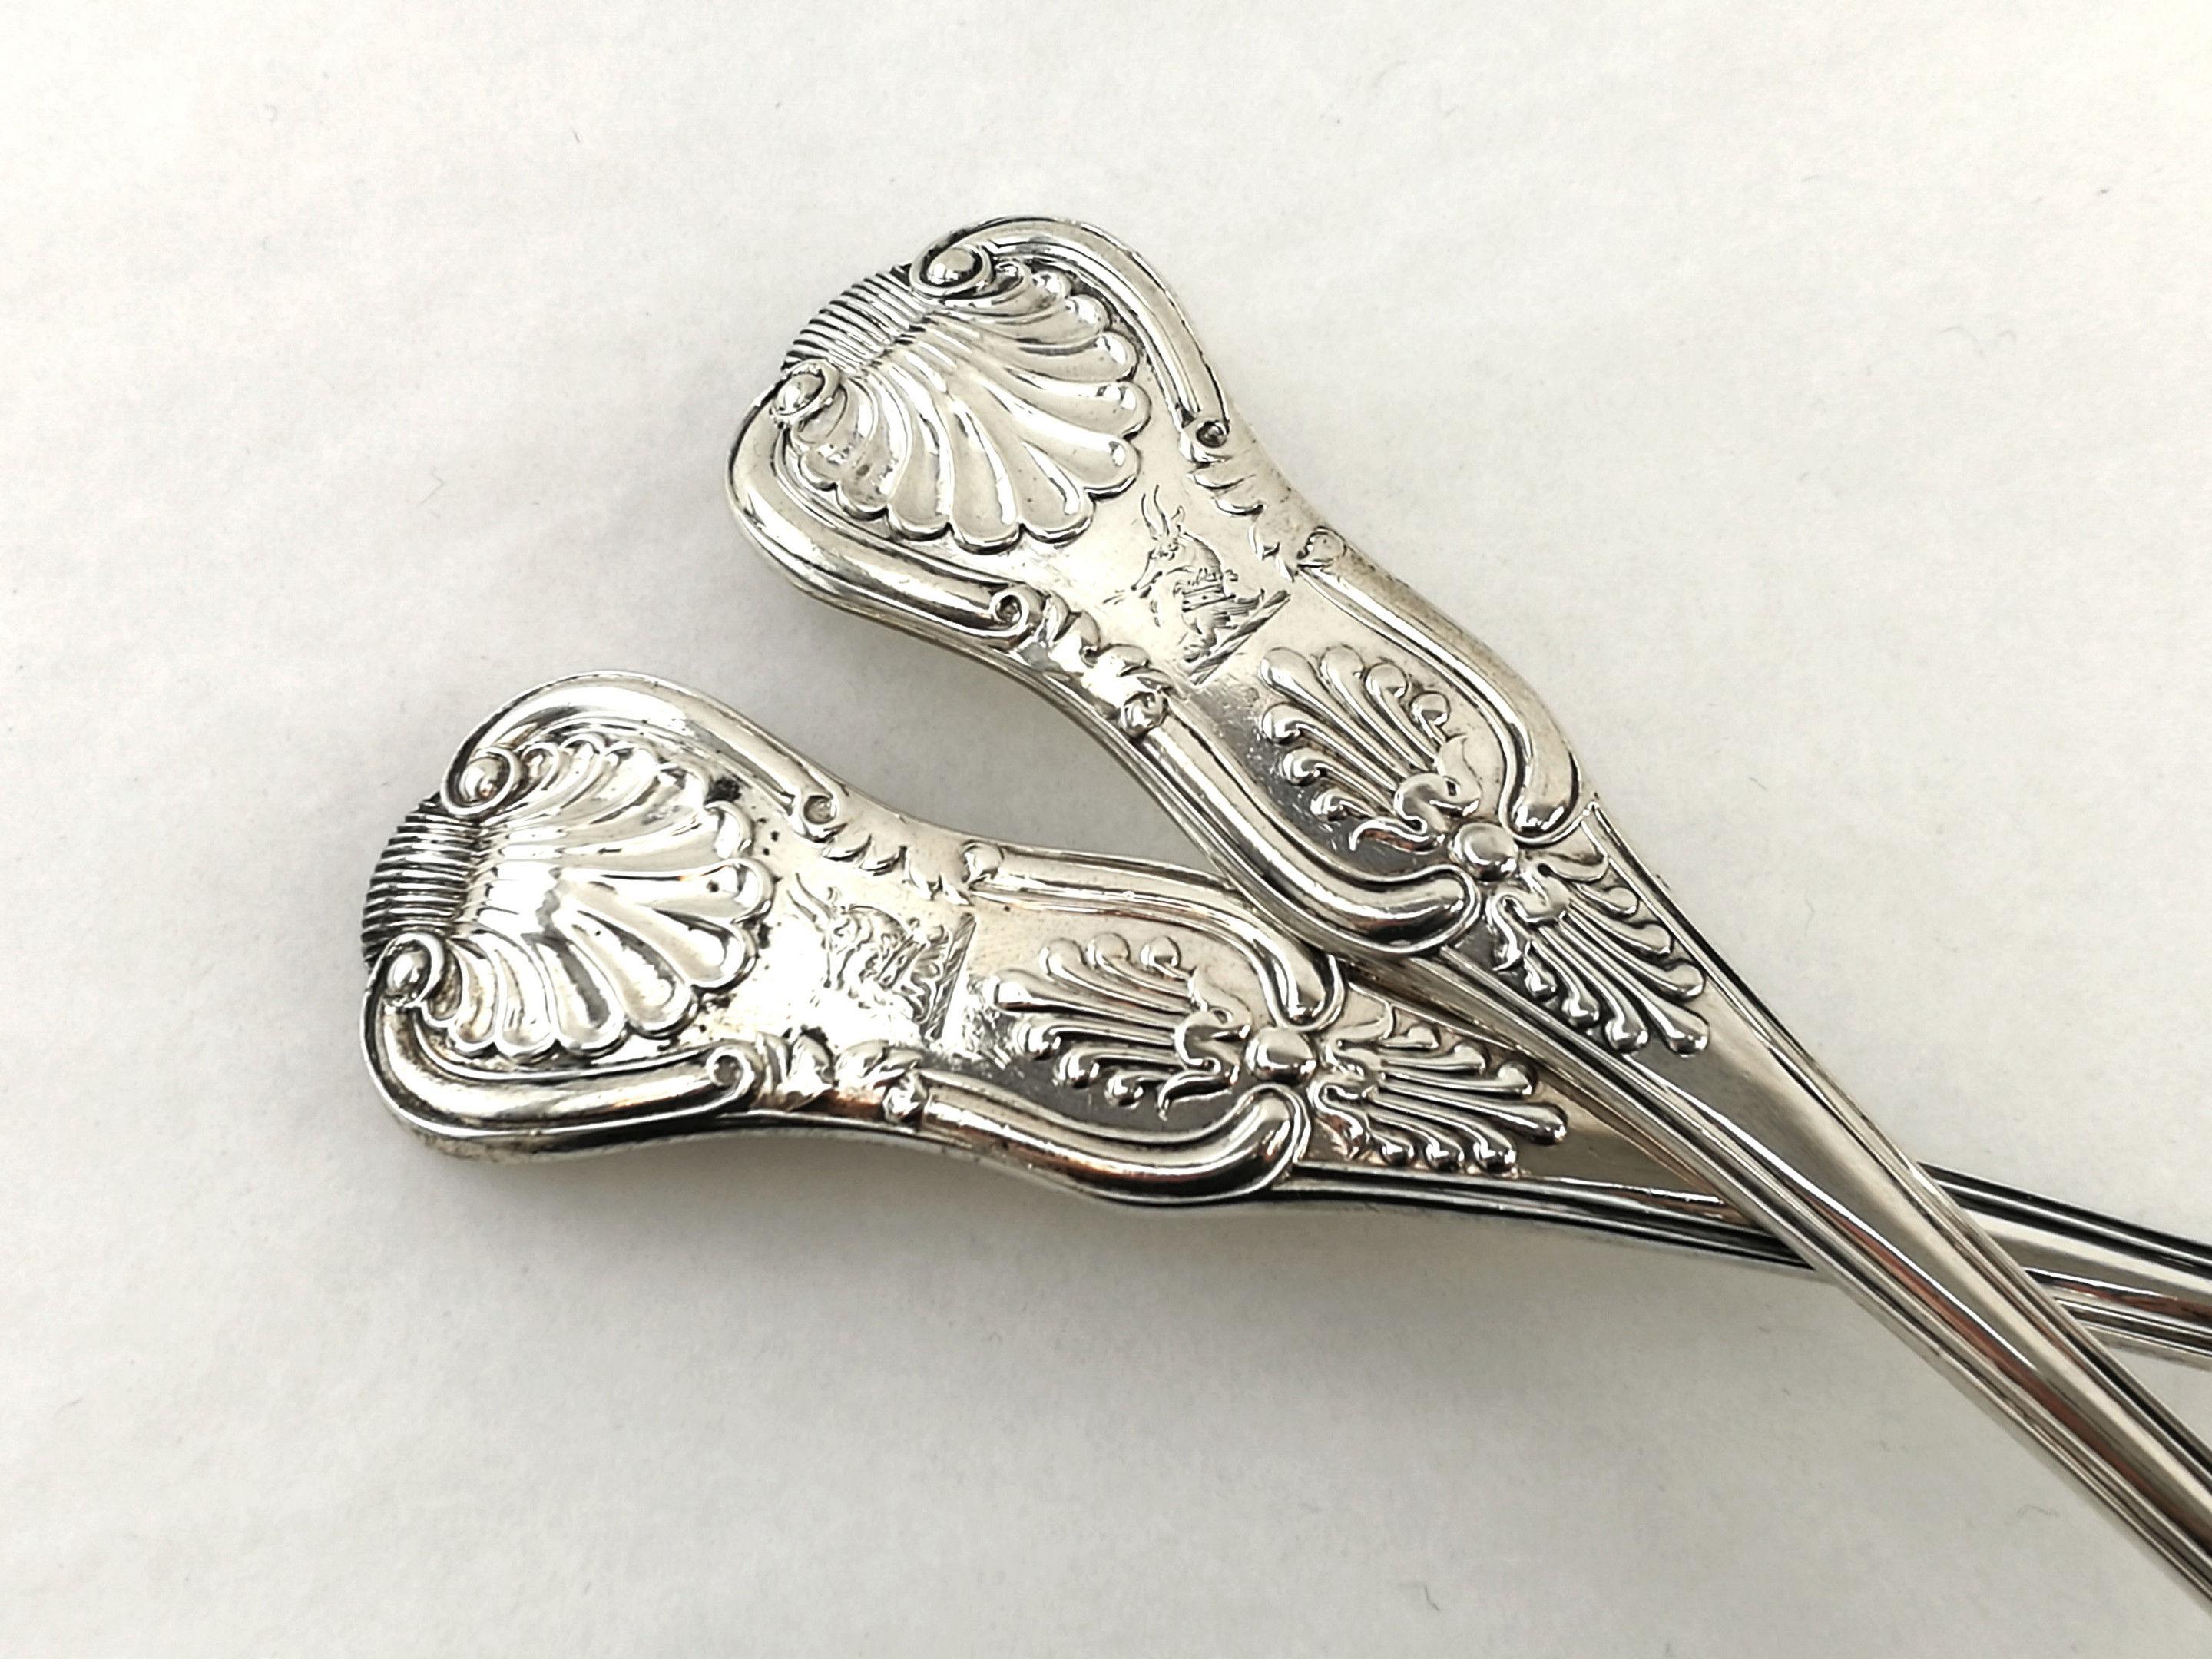 Sterling Silver Antique Victorian Solid Silver Serving Spoons/Stuffing Spoons London 1838, Pair